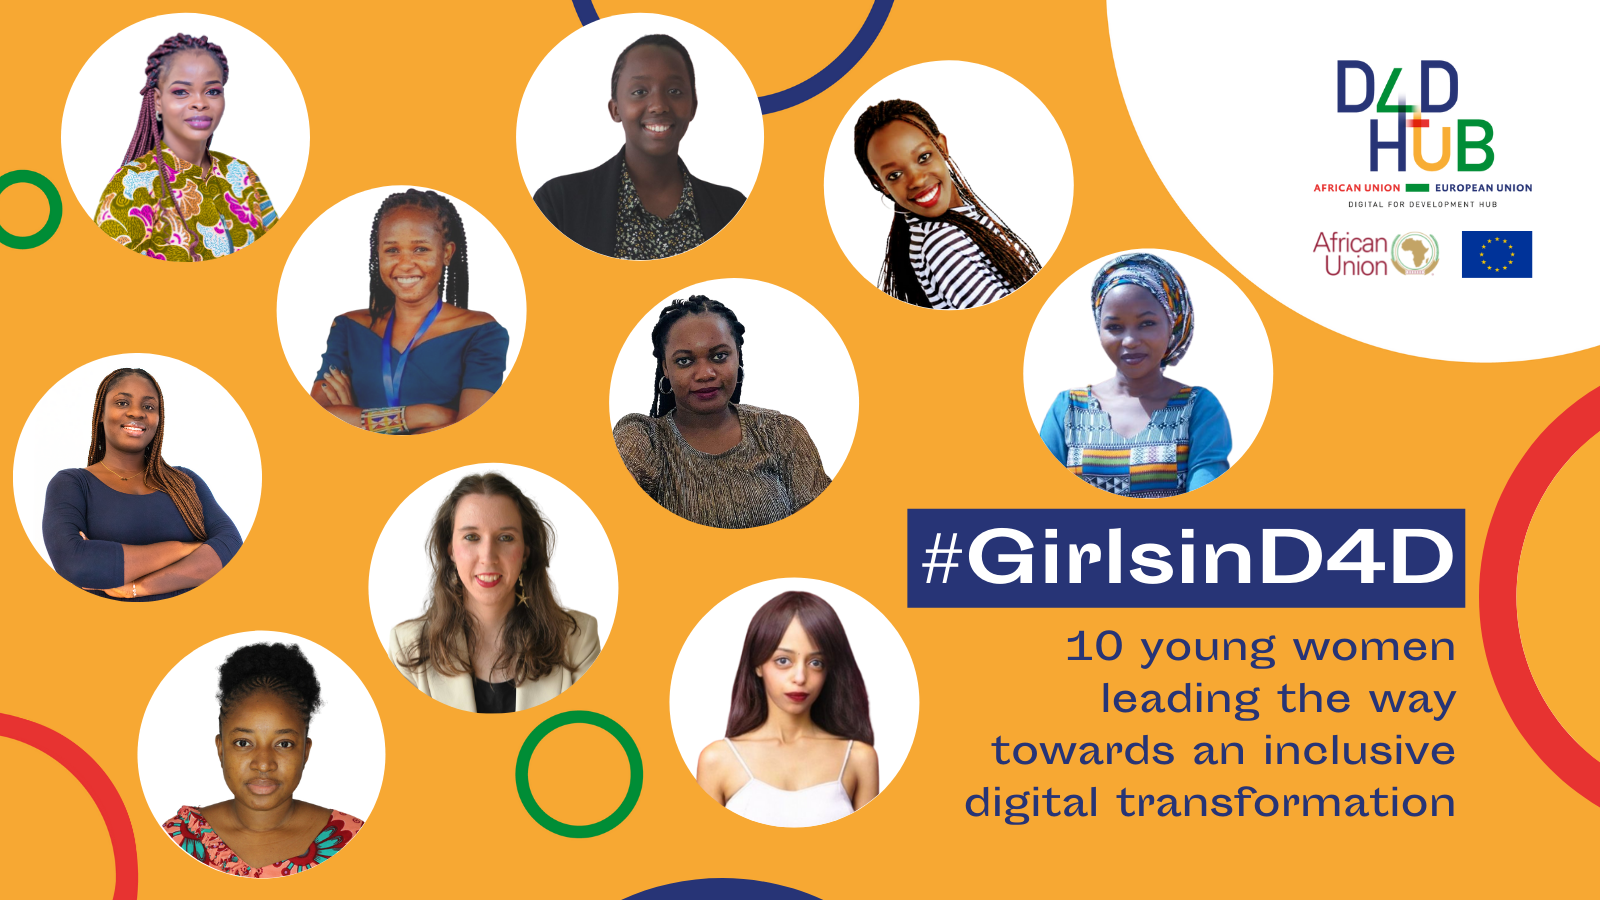 #GirlsinD4D: New campaign puts the spotlight on young female trailblazers in the Digital for Development field